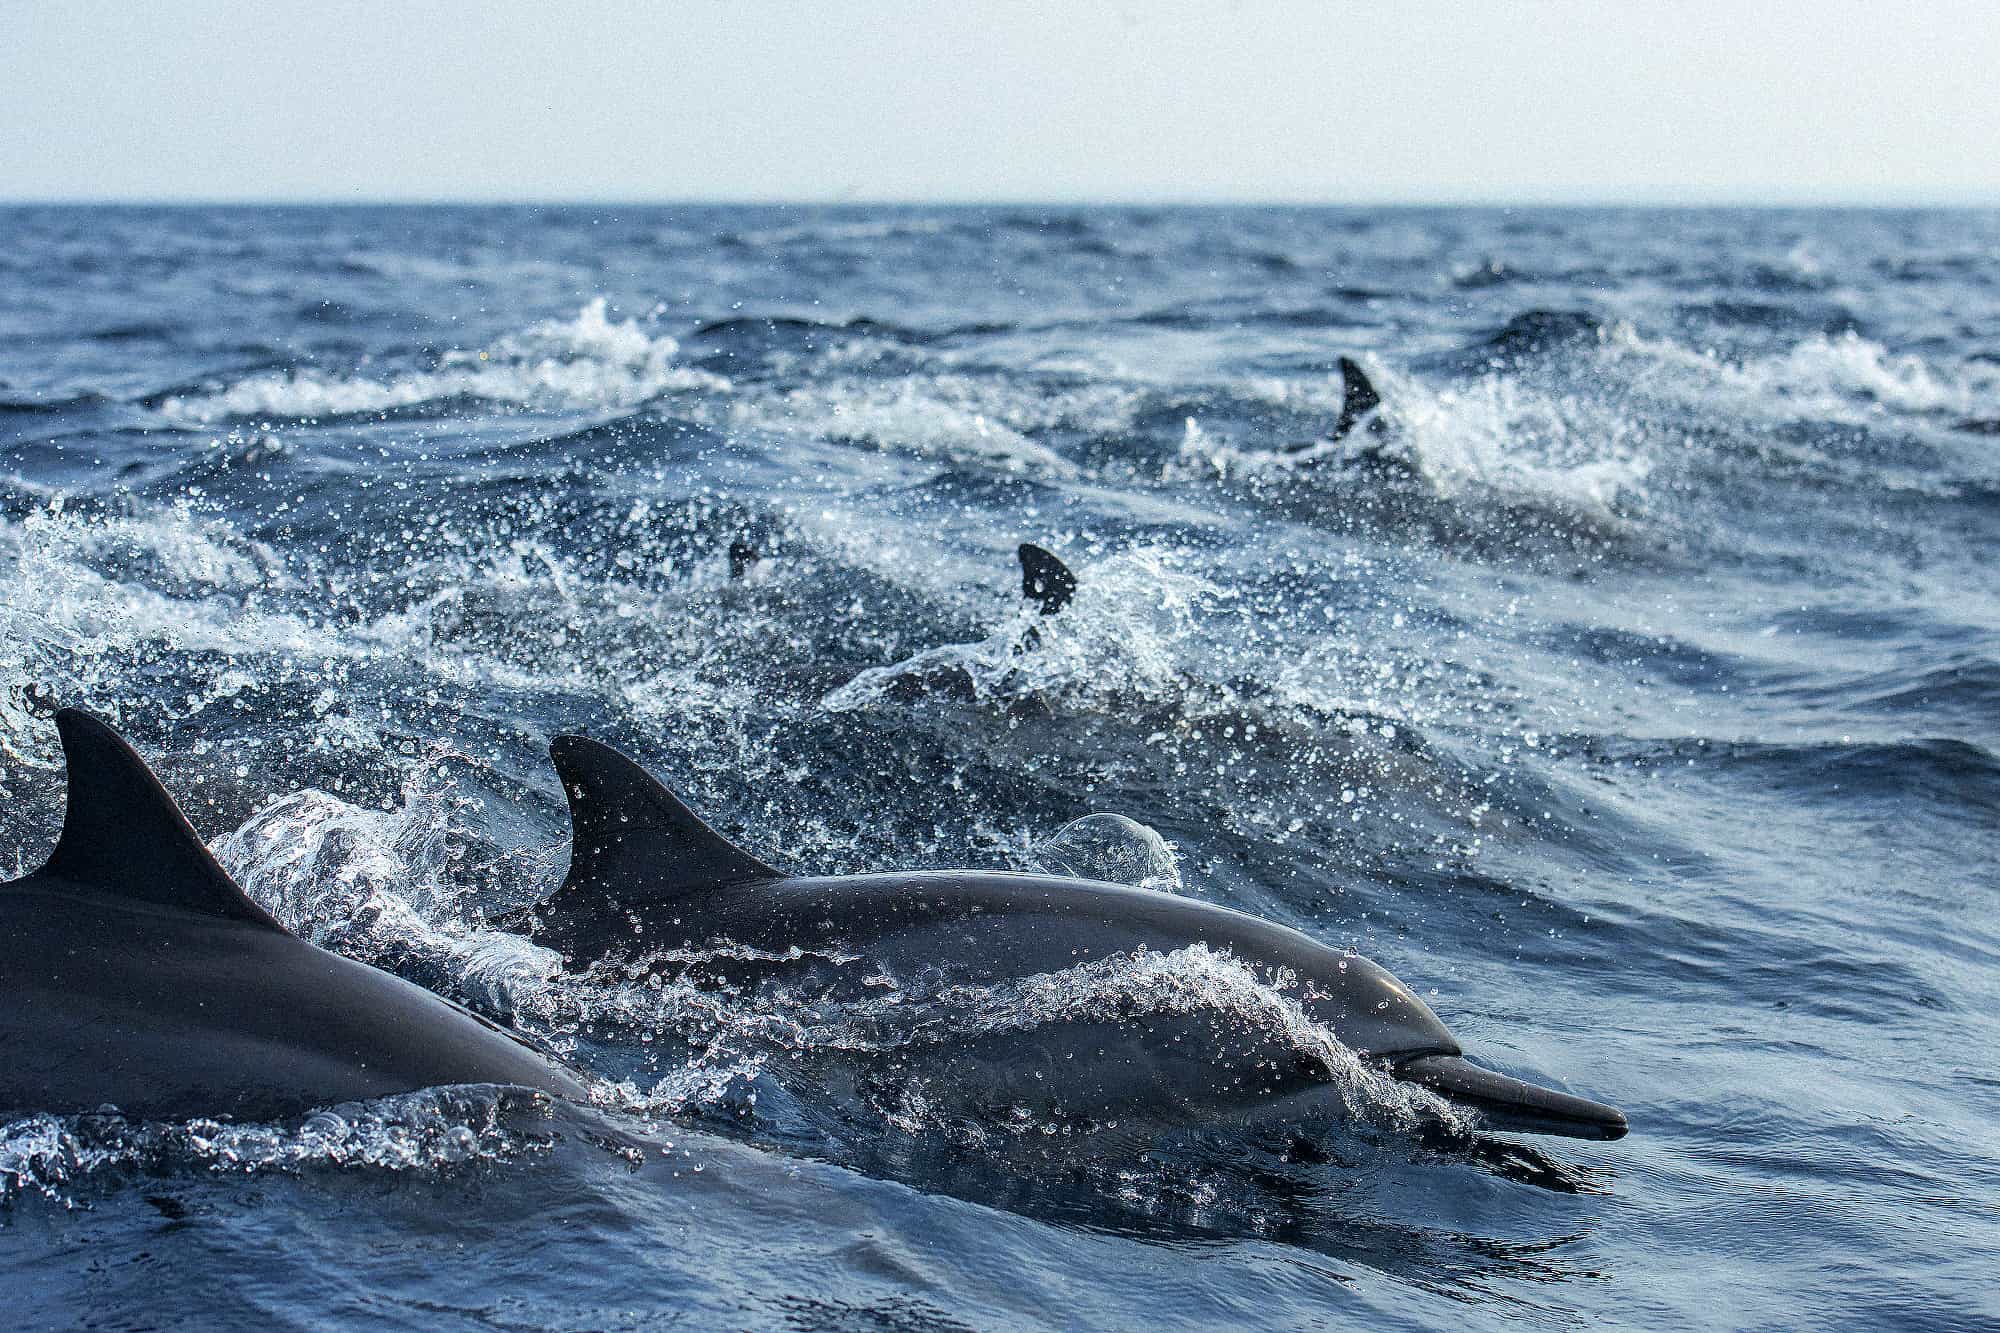 Dolphins in The Maldives